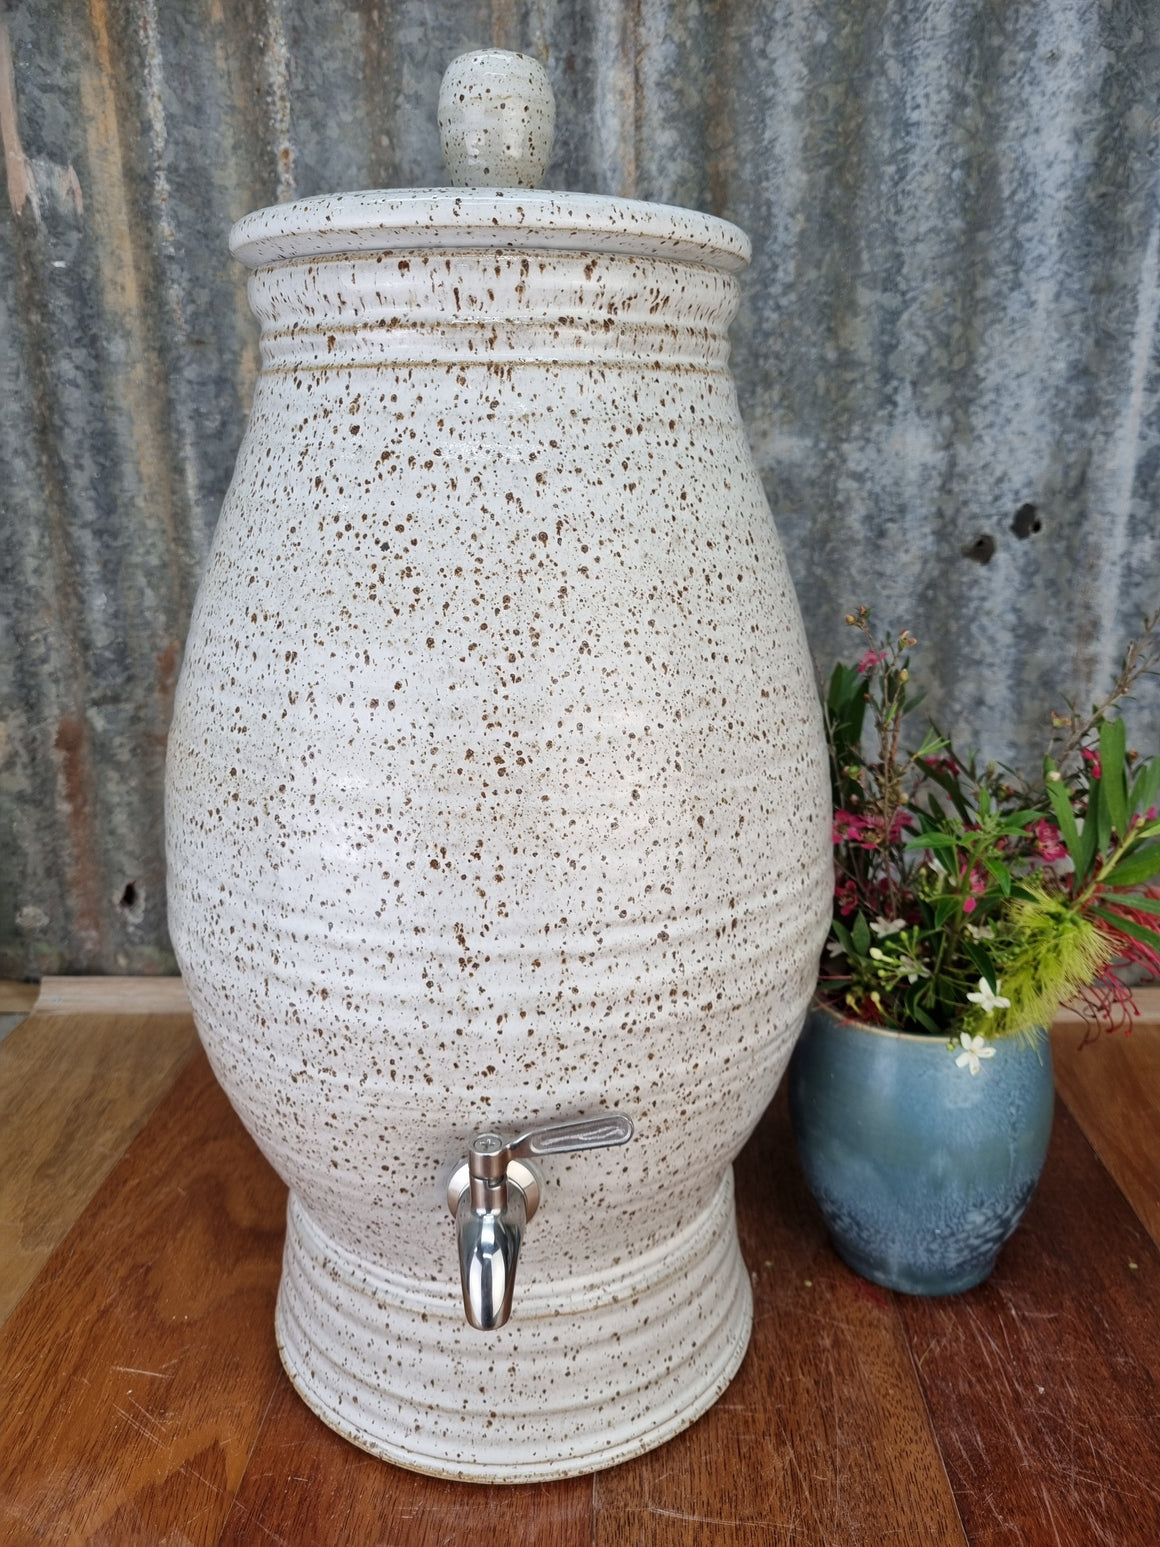 Mary Valley Mud Water Pot Vanilla Choc Chip - Peter Wallace Pottery